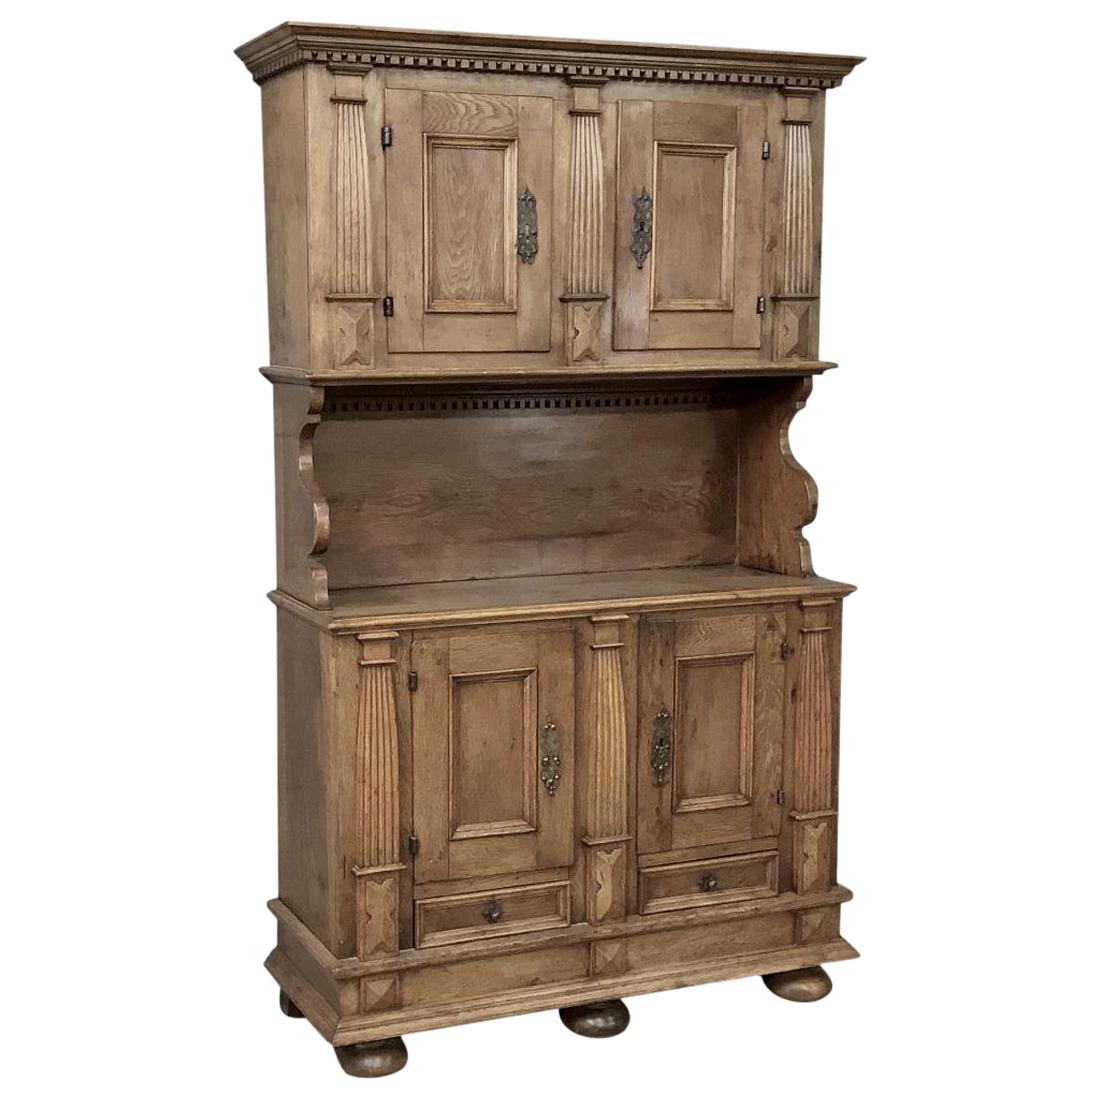 This handsome 18th century rustic Dutch oak two-tiered buffet was literally built to last for centuries out of dense, old-growth quarter sawn oak, and features some amazing hand-crafted detailing that is reminiscent of the later Arts & Crafts